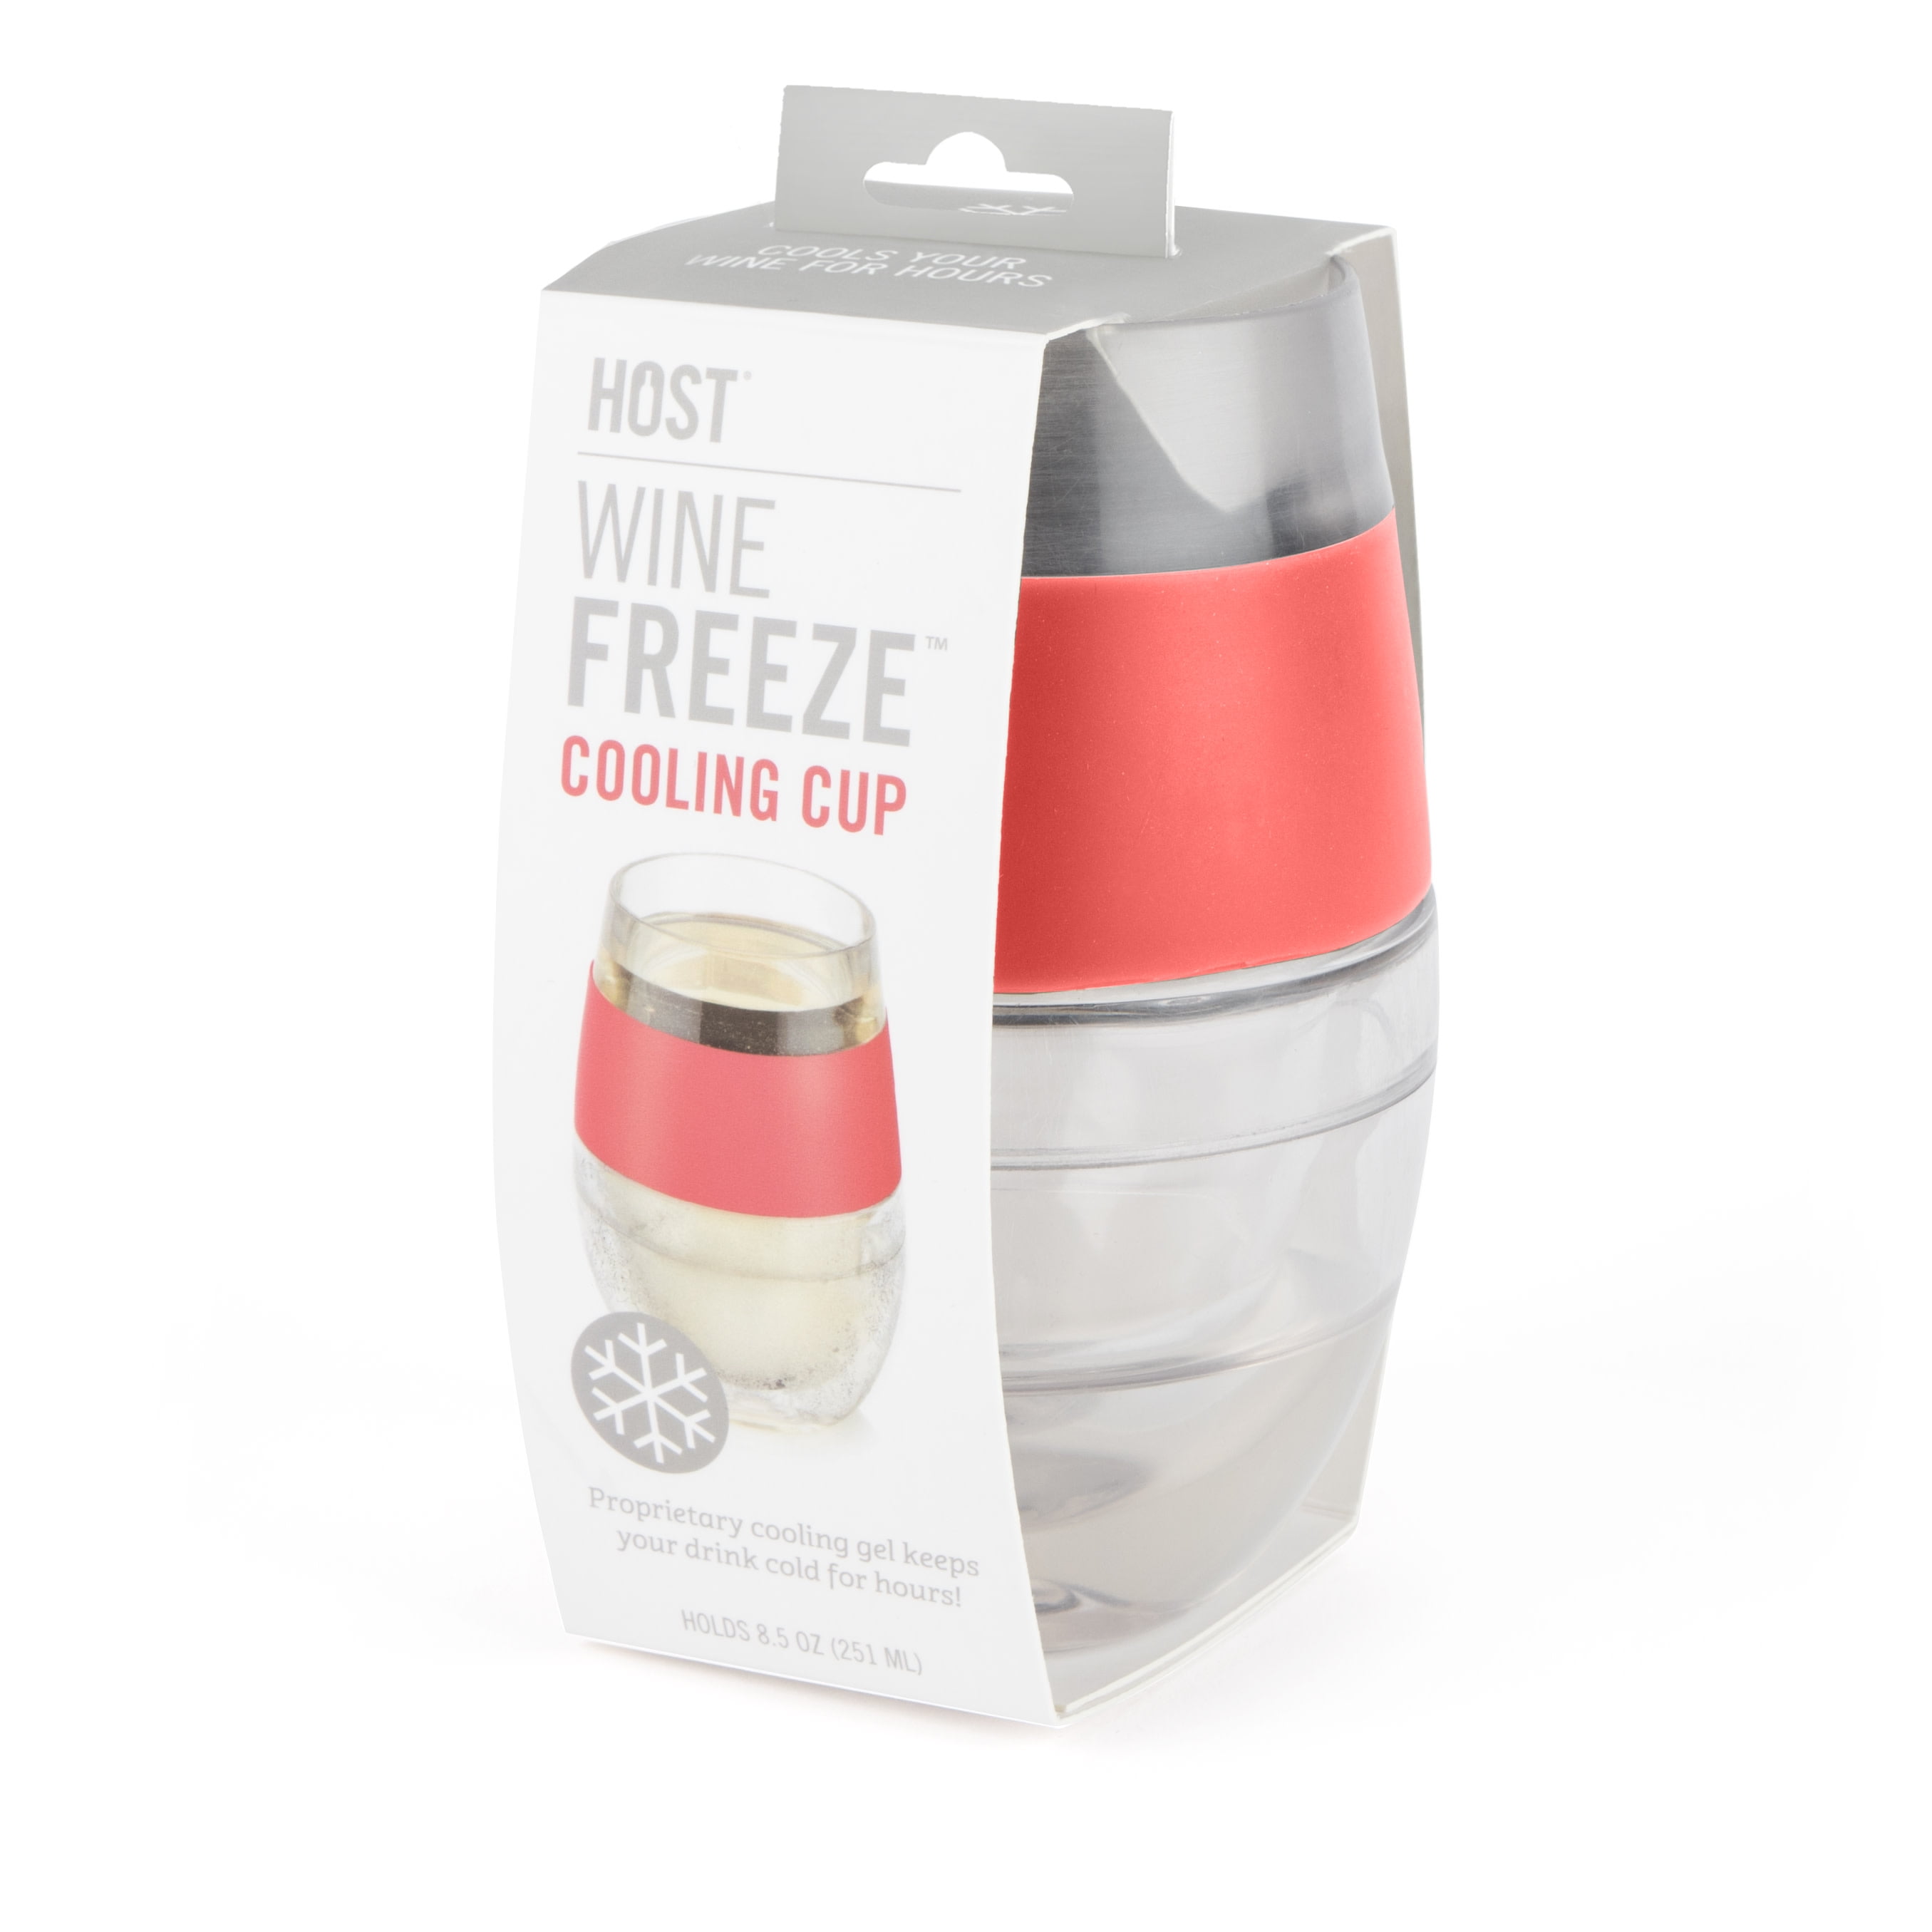 MAISON HUIS Wine Freeze Cooling Cup Stainless Steel, Double Wall Insulated  Freezable Drink Chilling …See more MAISON HUIS Wine Freeze Cooling Cup